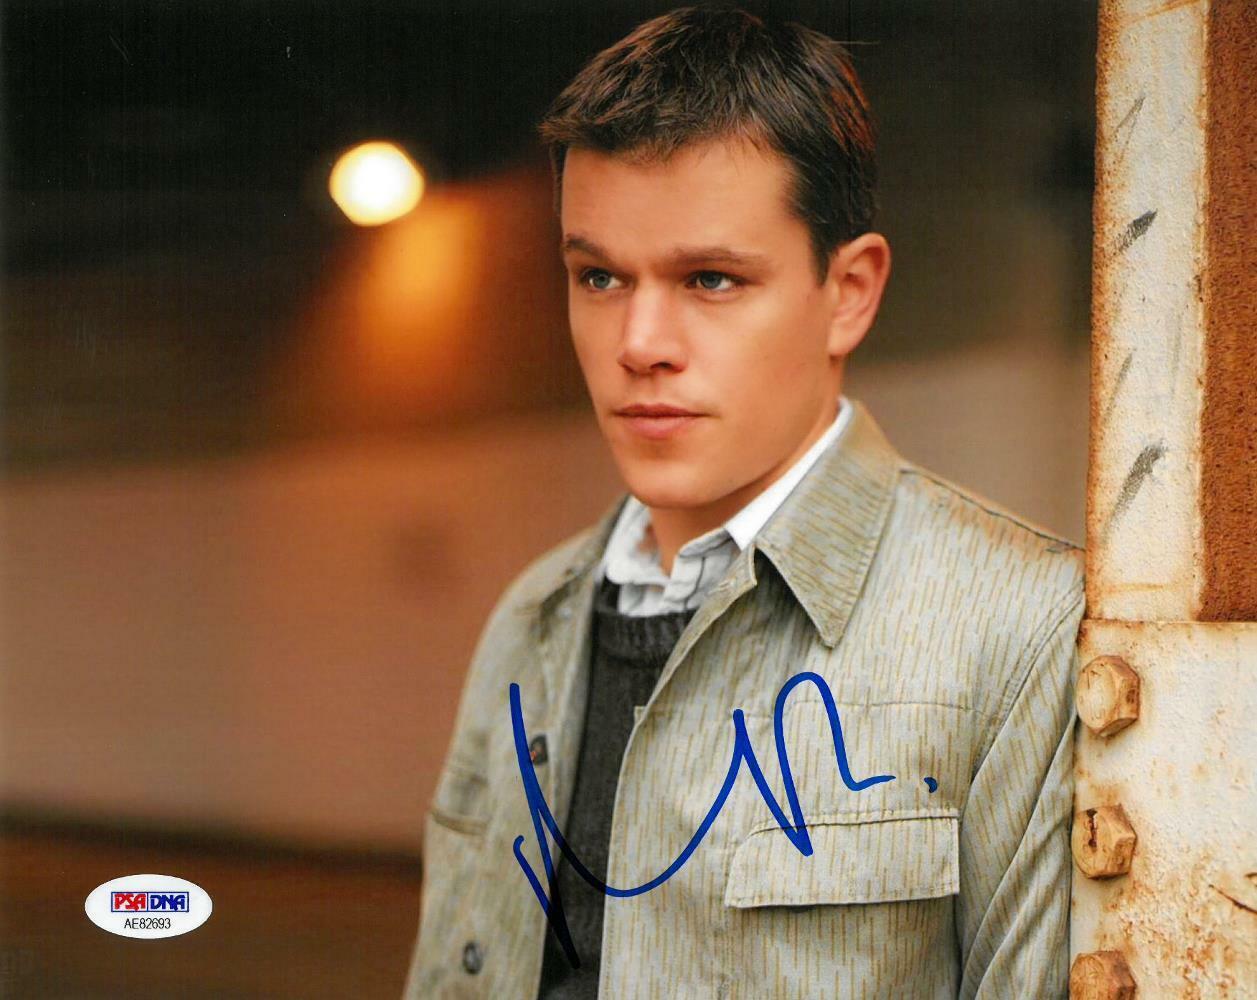 Matt Damon Signed Authentic Autographed 8x10 Photo Poster painting PSA/DNA #AE82693